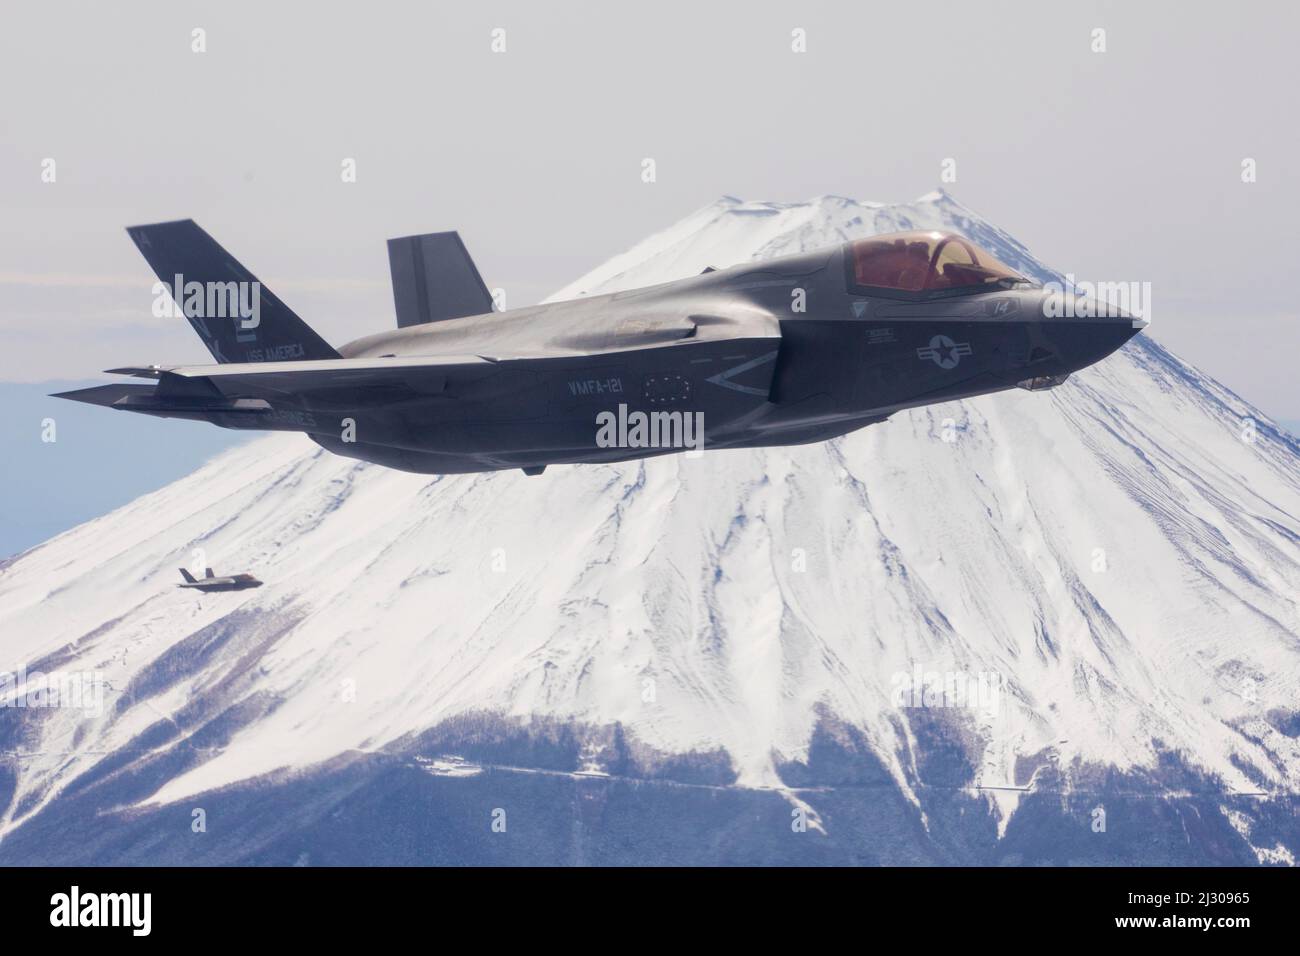 March 23, 2022 - Mt. Fuji, Japan - U.S. Marine Corps F-35B Lightning II with Marine Fighter Attack Squadron (VMFA) 121 fly near Mt. Fuji, Japan, March 23, 2022. Marines with Marine Aerial Refueler Transport Squadron 152 supported Marines with VMFA-121 during a training flight simulating close air support at Camp Fuji, Japan. Marine Corps aviation routinely conducts training throughout the region to remain combat-ready in support of a free and open Indo-Pacific and to demonstrate our commitment to the Treaty of Mutual Cooperation and Security between the U.S. and Japan. (Credit Image: © U.S. Ma Stock Photo